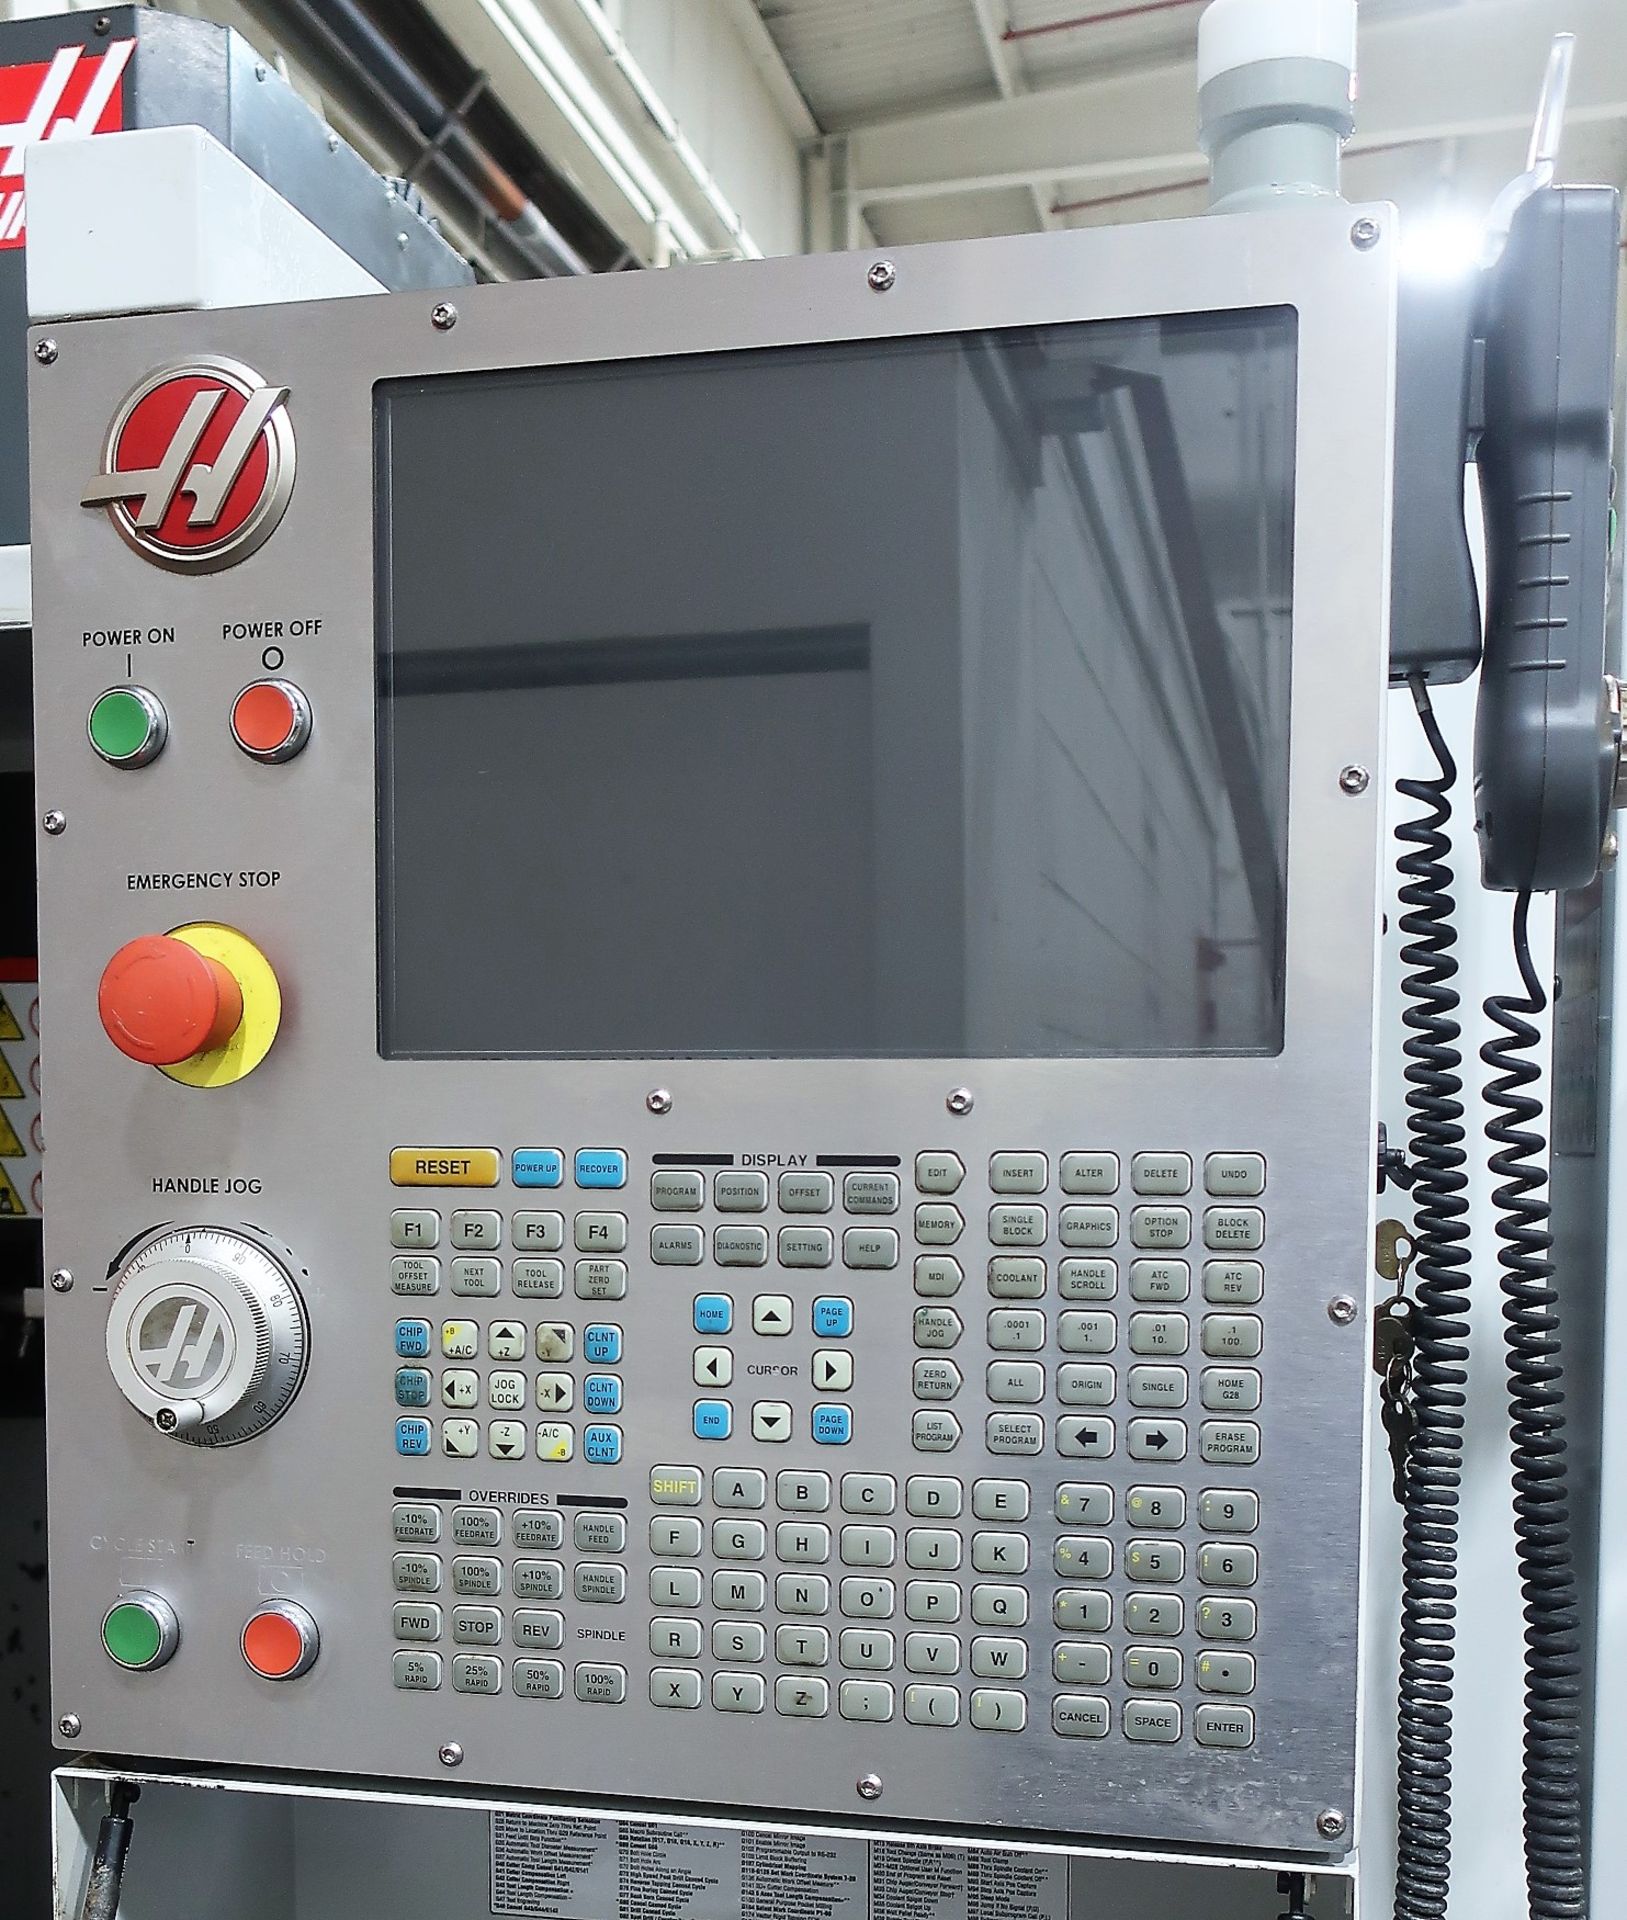 Haas DT-2 4-Axis CNC Dri//Tap Mill Vertical Machining Center, S/N 1135274, New 2016 - Image 2 of 9